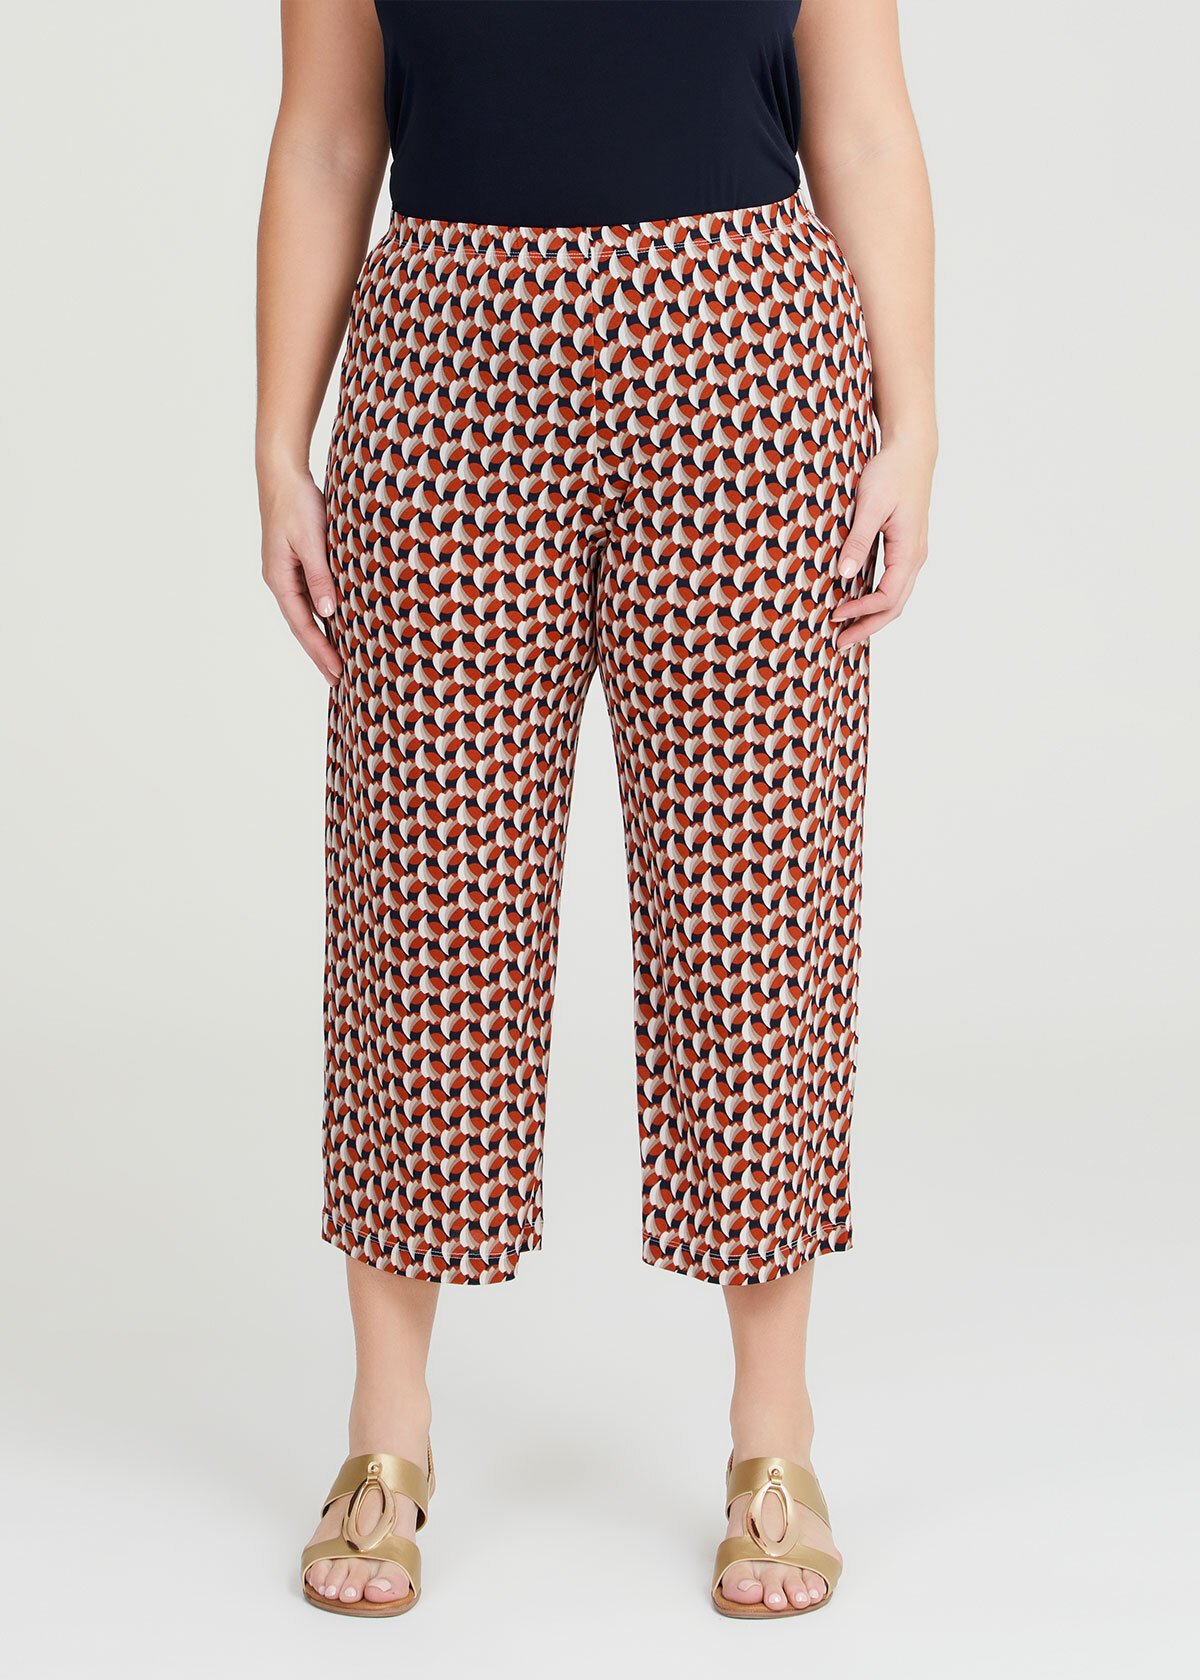 Shop Plus Size Printed Culotte Pant in Multi | Sizes 12-30 | Taking ...